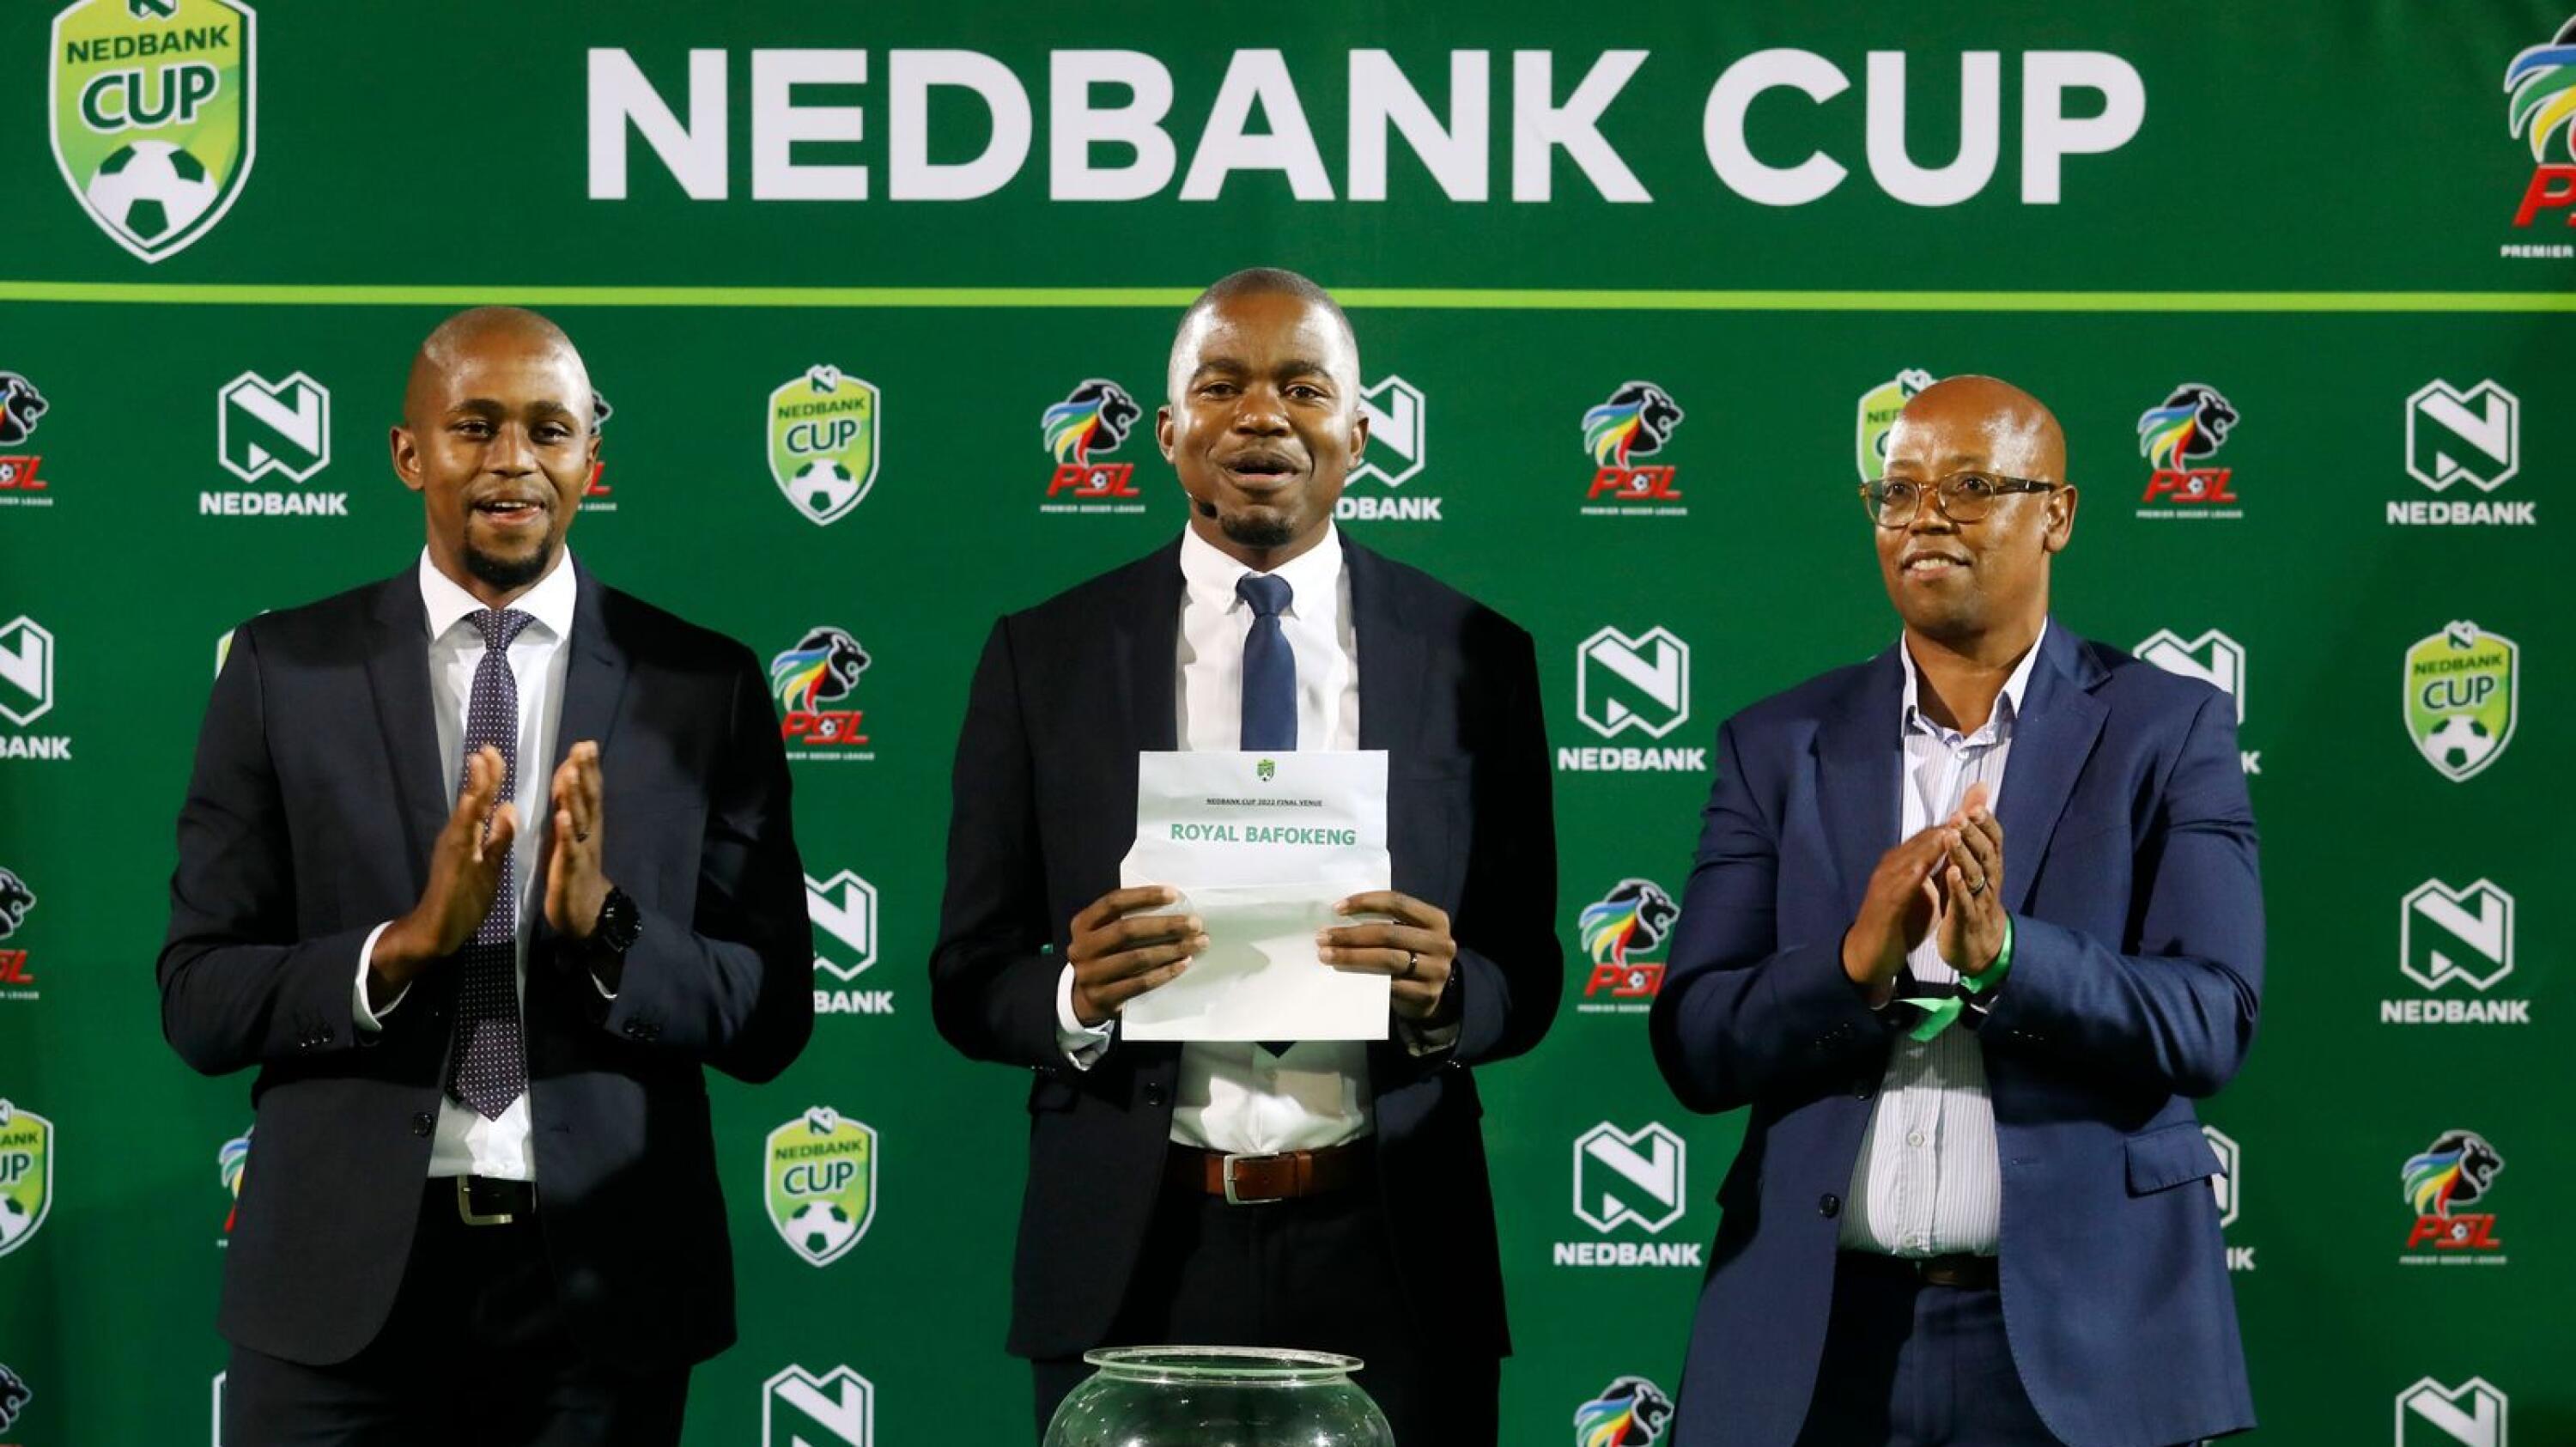 General view of the Nedbank Cup final draw being conducted at the Chatsworth Stadium in Durban on Sunday